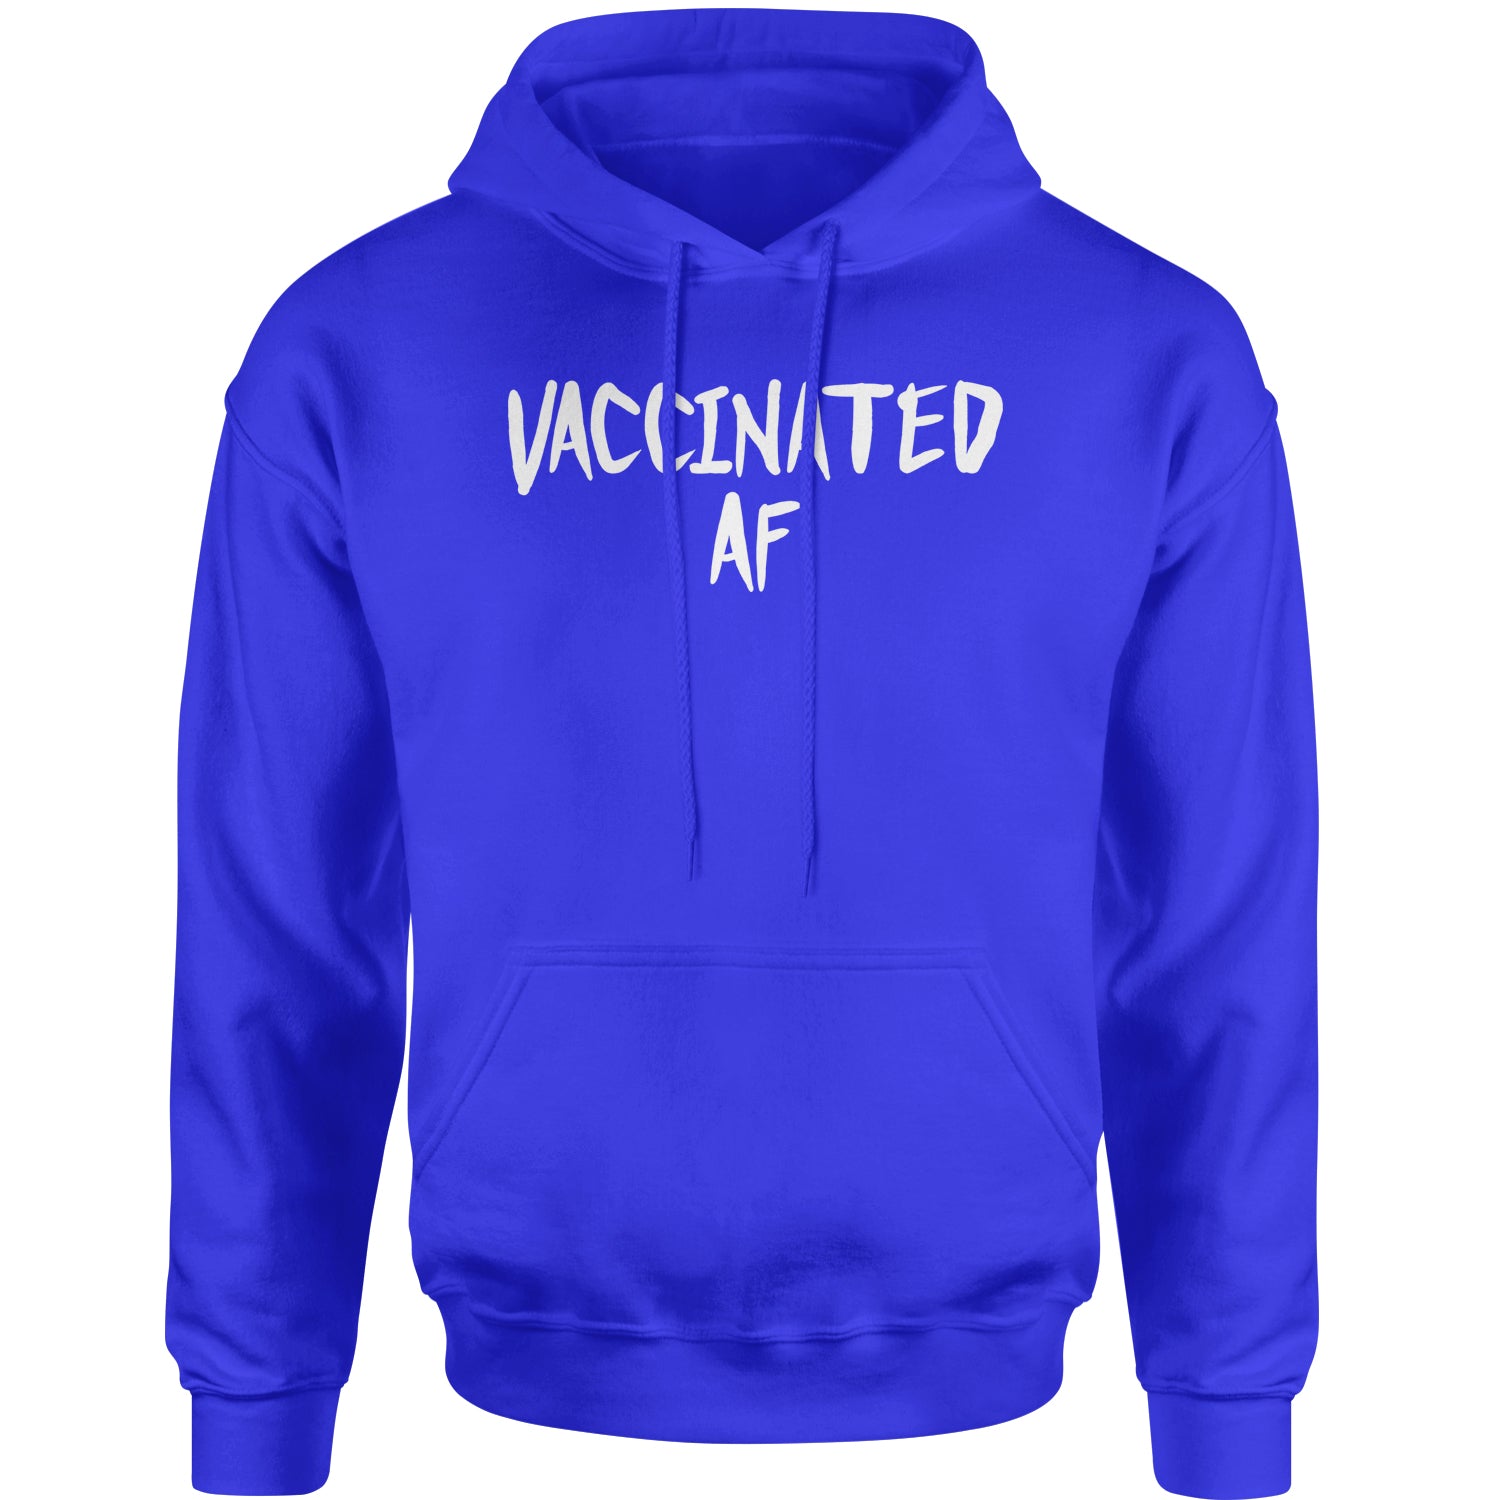 Vaccinated AF Pro Vaccine Funny Vaccination Health Adult Hoodie Sweatshirt moderna, pfizer, vaccine, vax, vaxx by Expression Tees